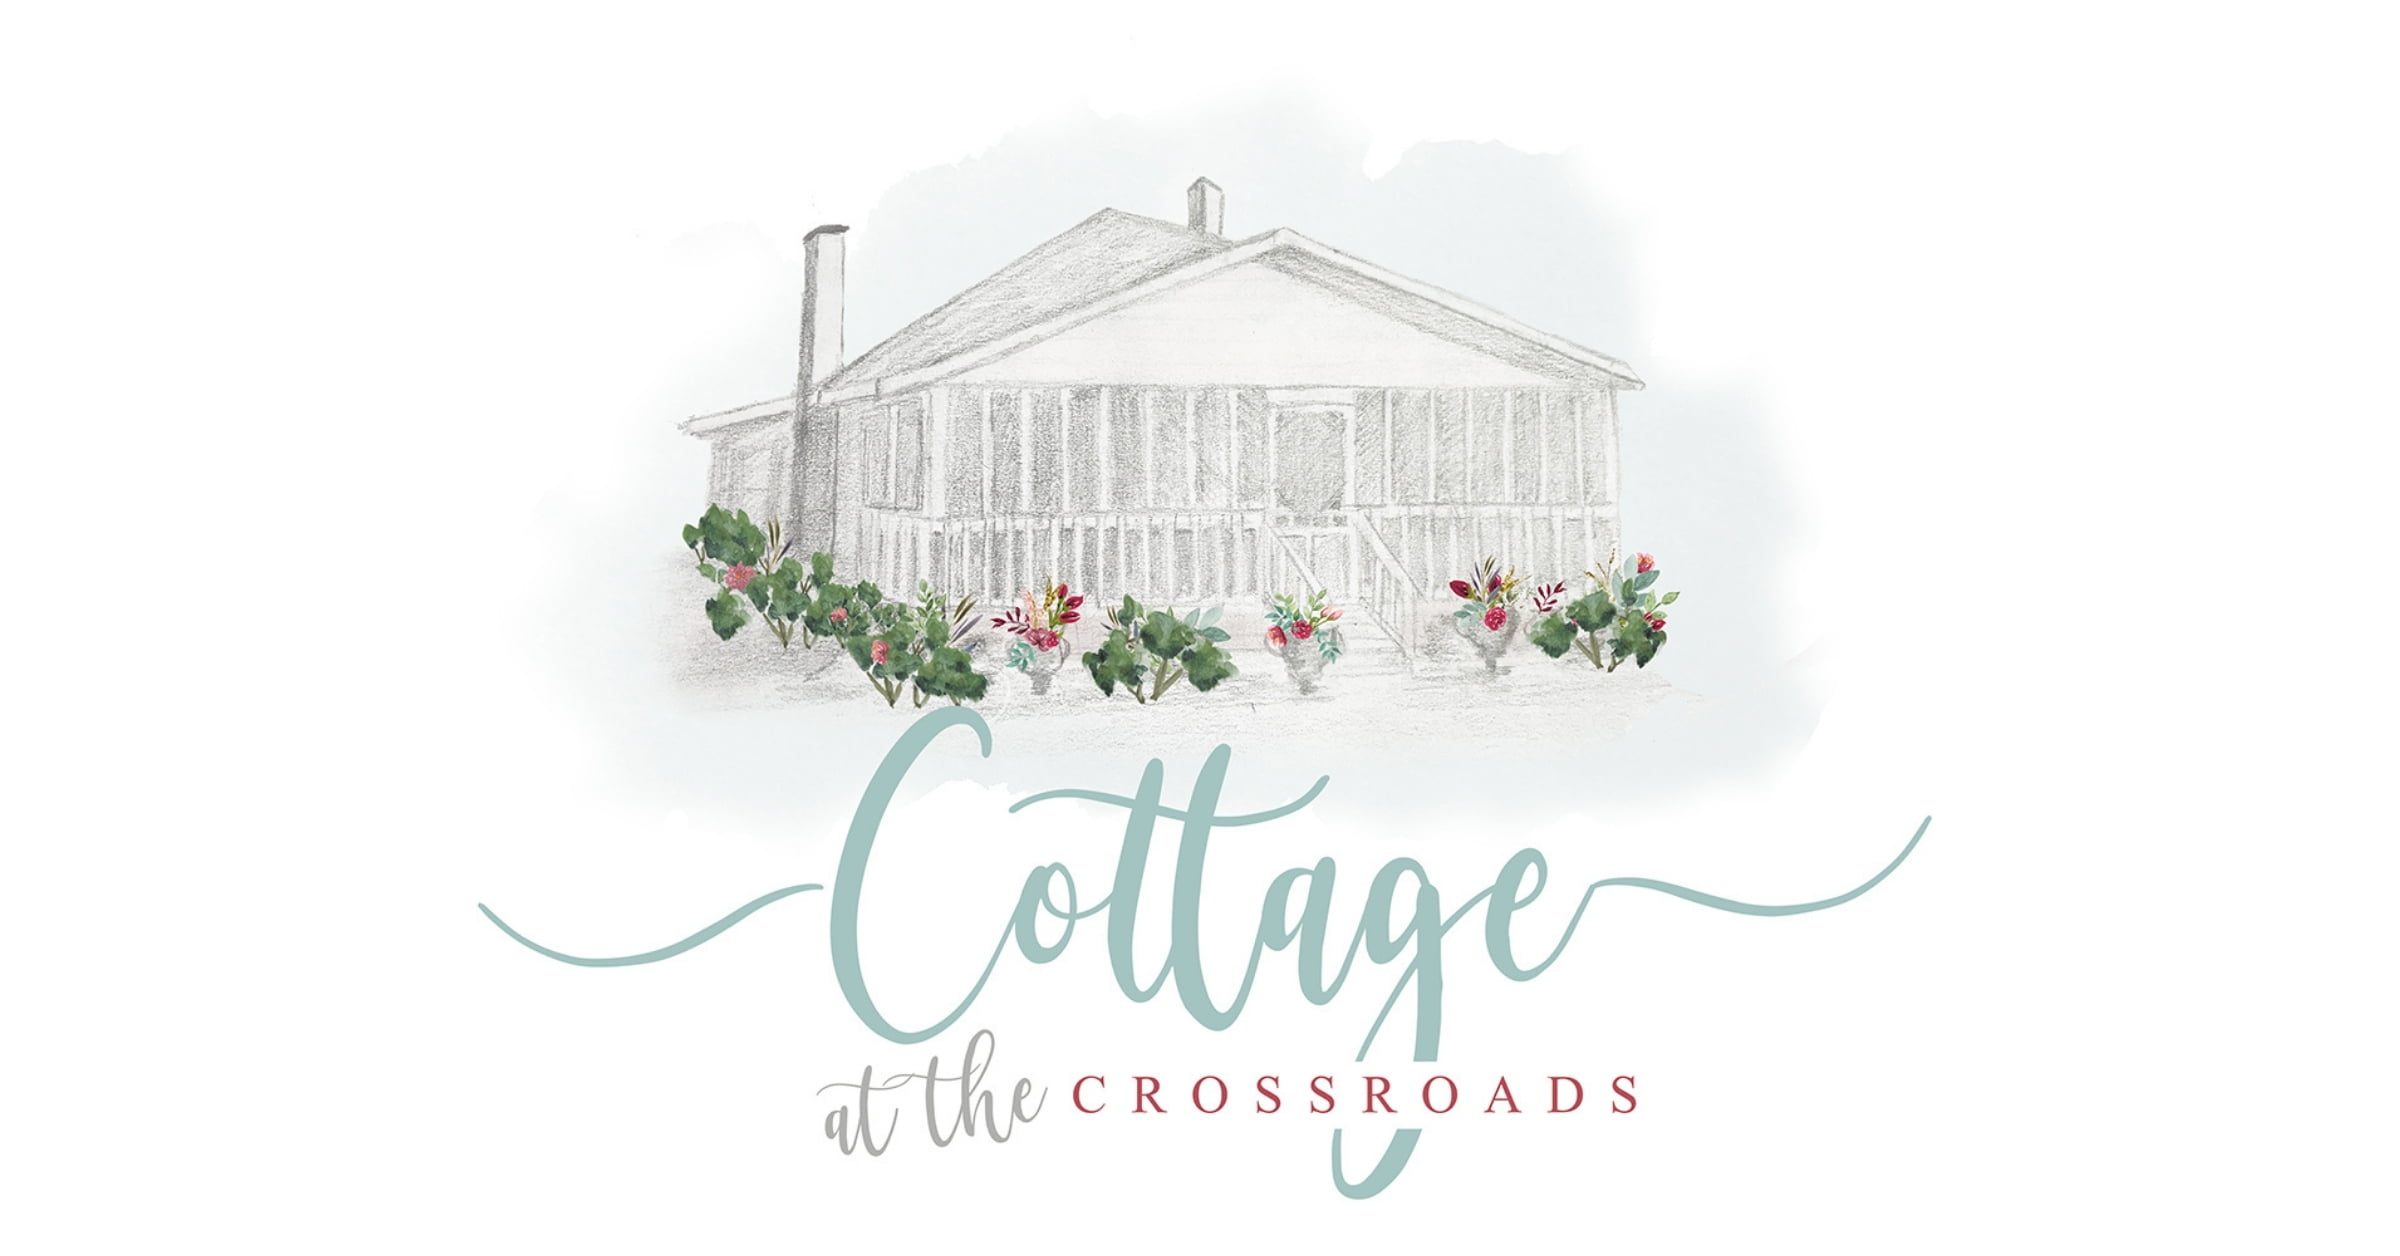 Discbound Notebooks (My New Love) - Cottage at the Crossroads